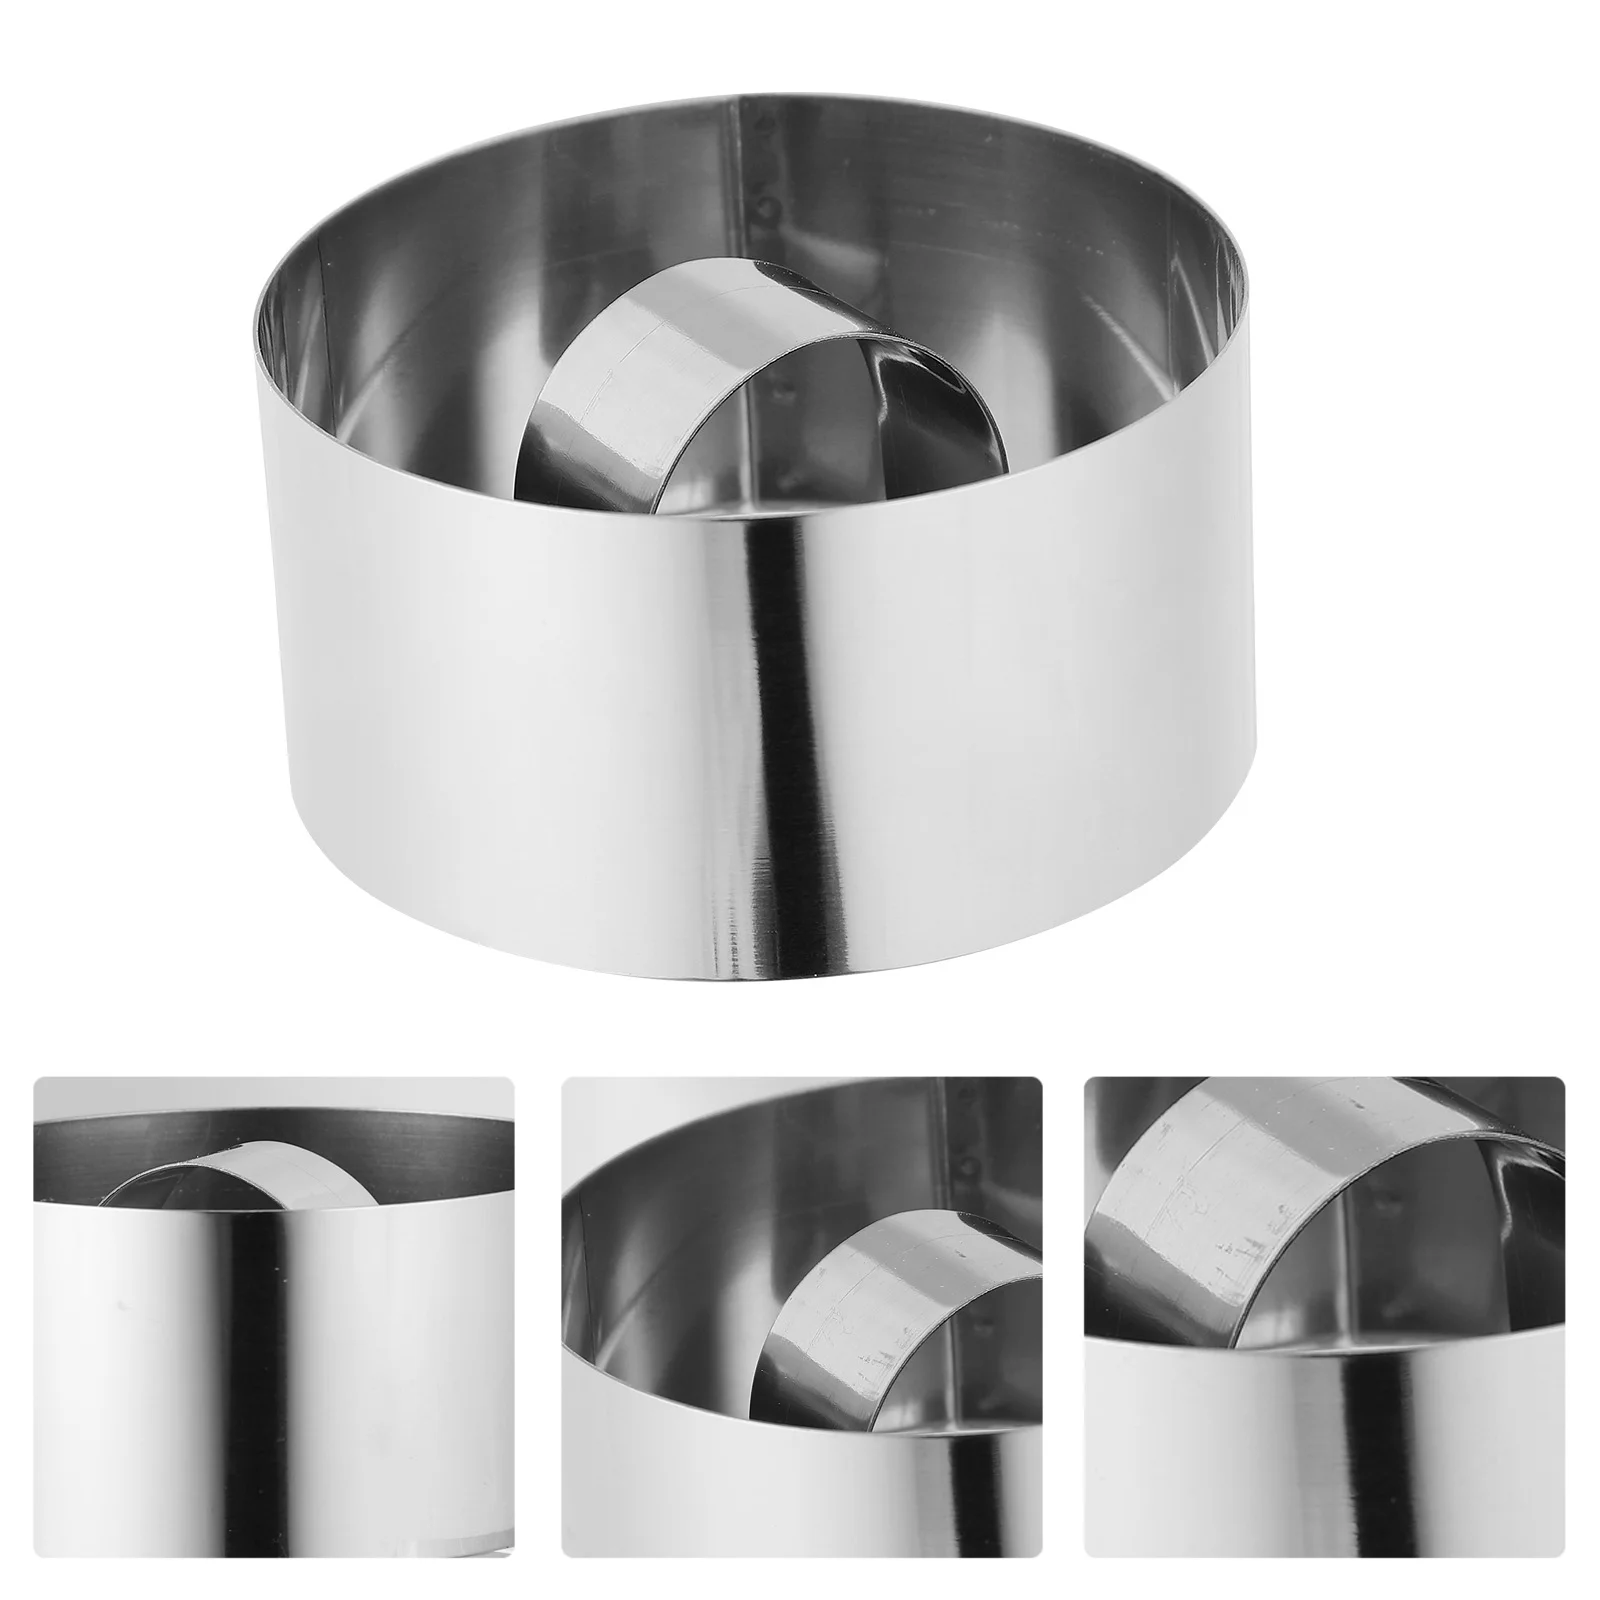 

8 Pcs Stainless Steel Biscuit Mold Cheese Mousse Ring Molds Moulds Baking Tool Kitchen Tools Cookie Cutters Round Rings Pastry